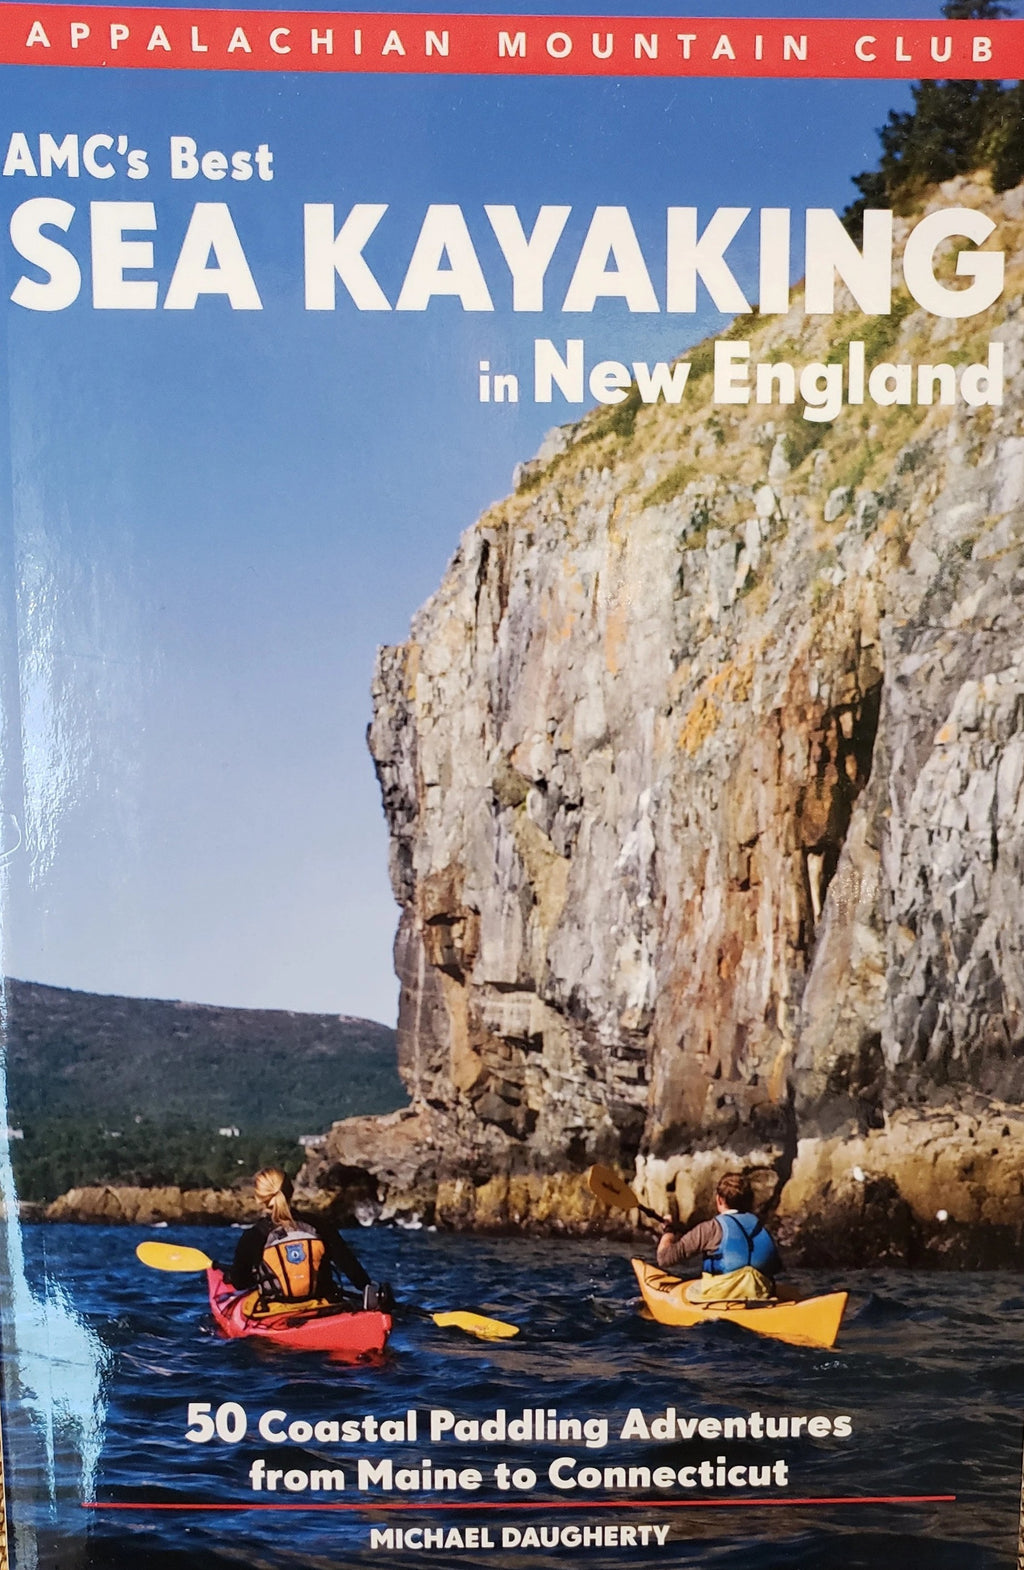 AMC's Best Sea Kayaking in New England by Michael Daugherty